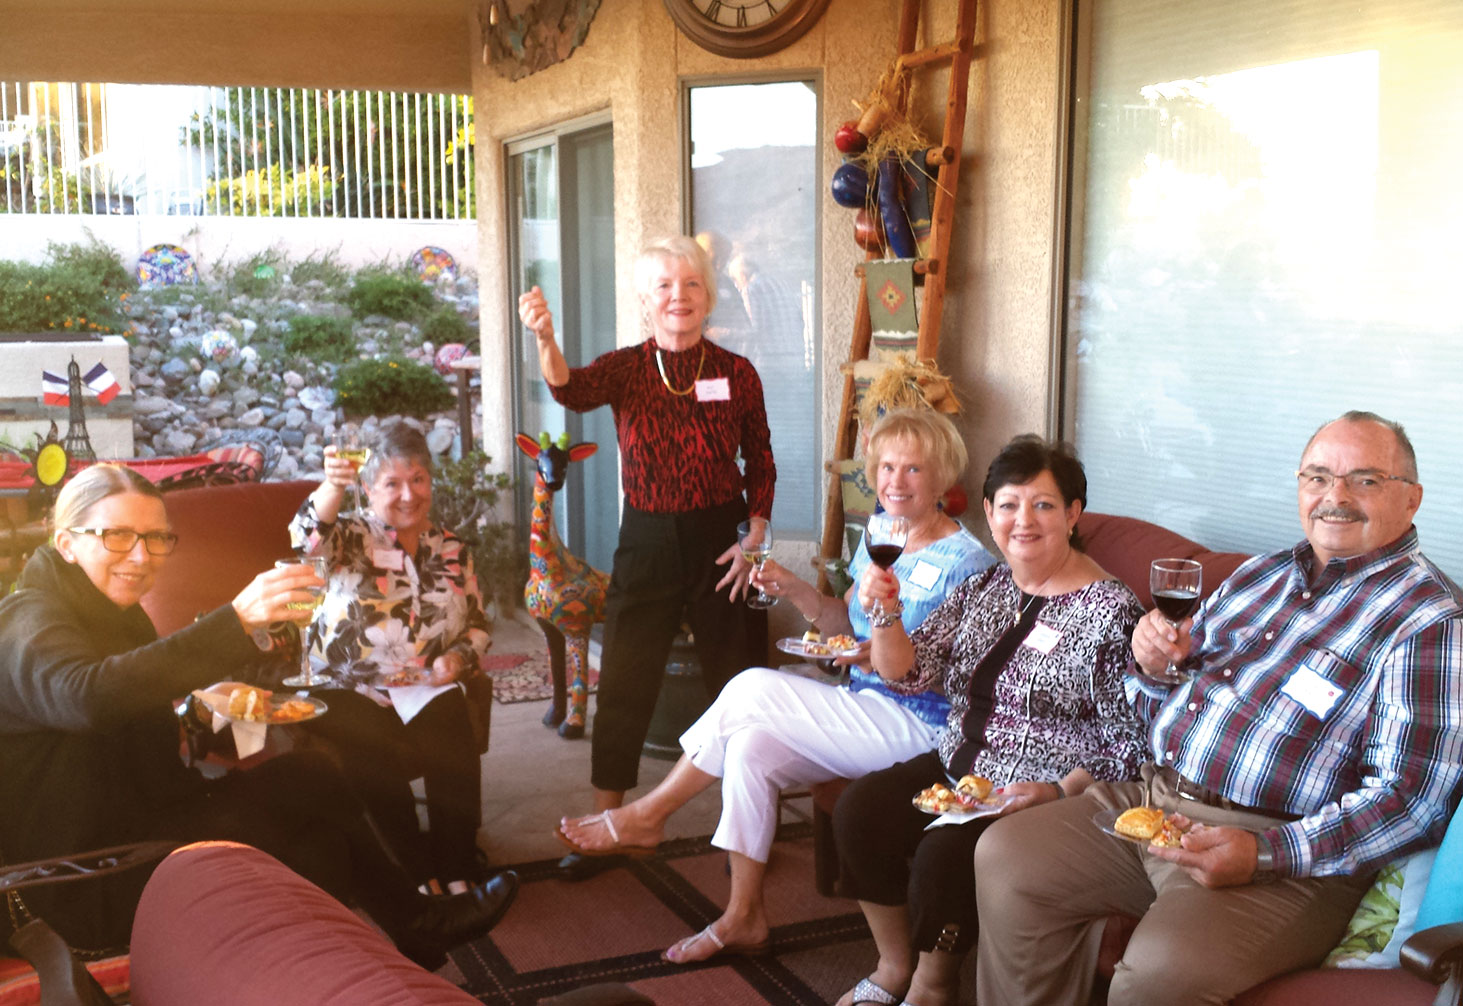 Toasting our dinner, left to right: Mylinda Guillen, Jan DiEnno, Pat Smith, Lennie Good, Linda and Jim Gray